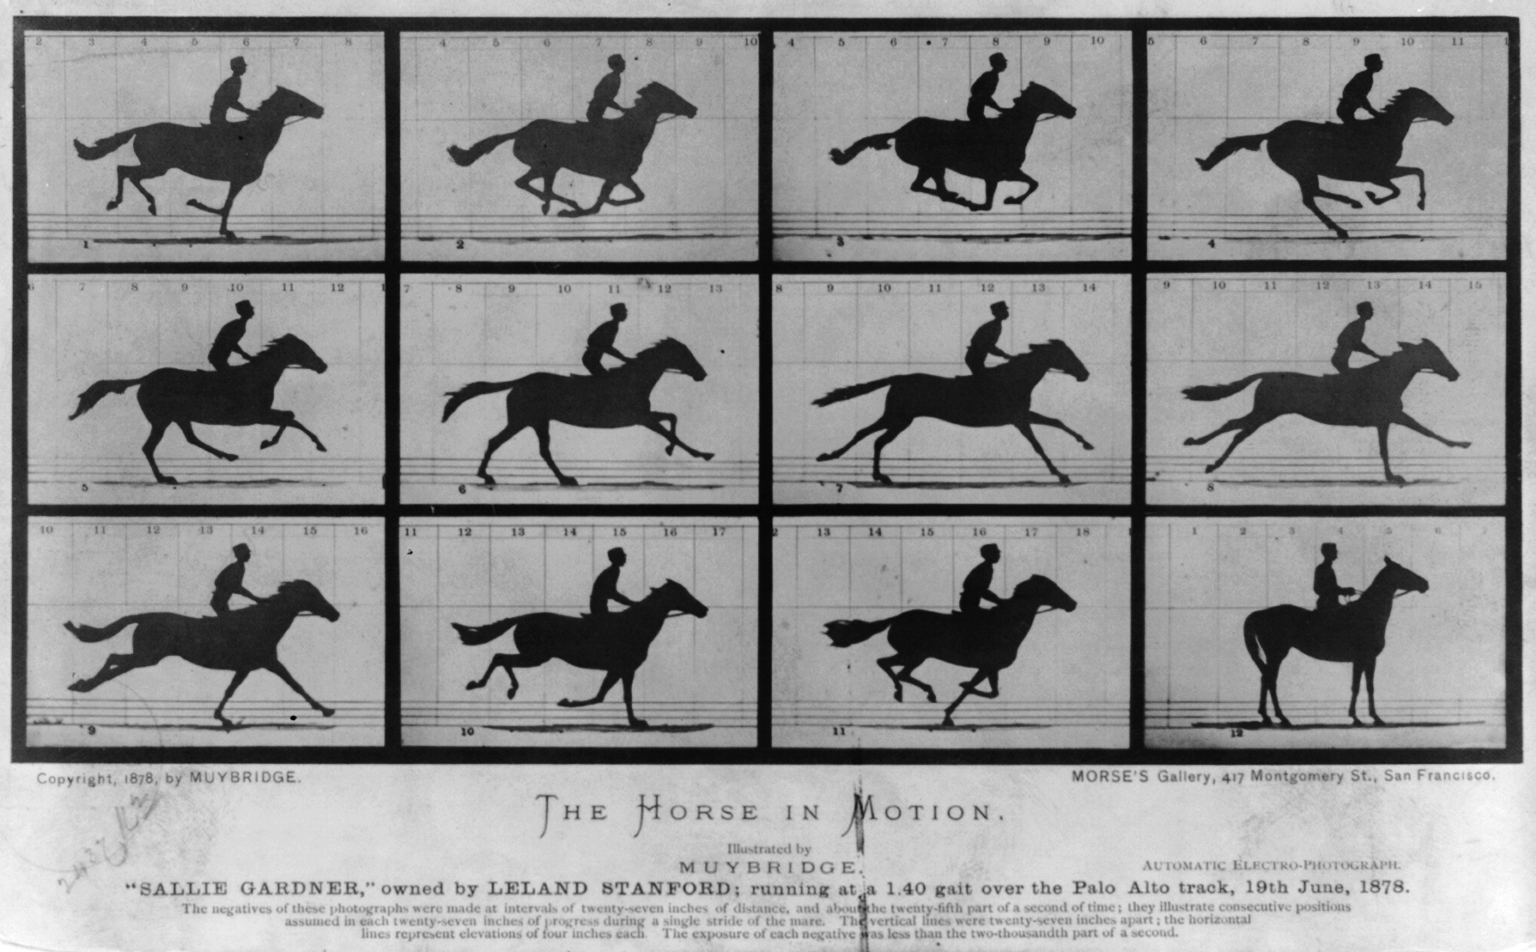 The Horse in motion. "Sallie Gardner," owned by Leland Stanford; running at a 1:40 gait over the Palo Alto track, 19th June 1878 by Eadweard Muybridge - 1878 - - Library of Congress